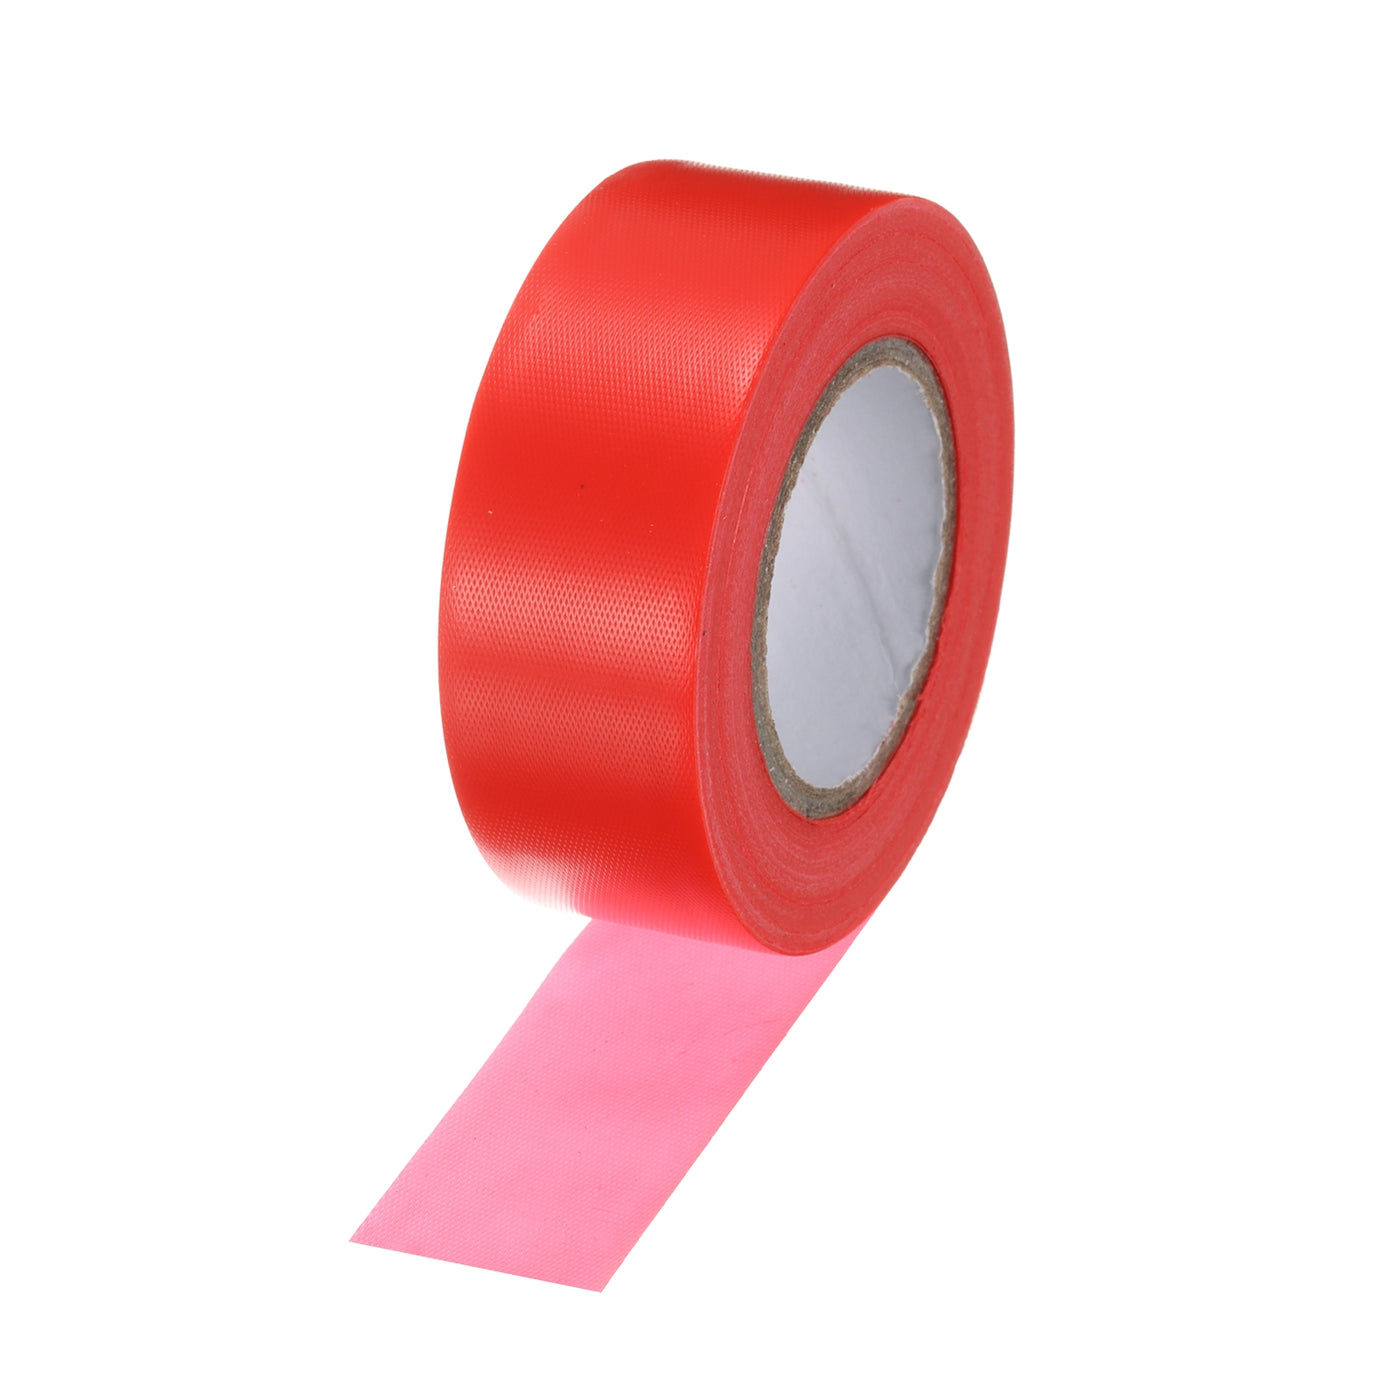 uxcell Uxcell PVC Flagging Tape 25mm x 30m/98.4ft Marking Tape Non-Adhesive 8pcs